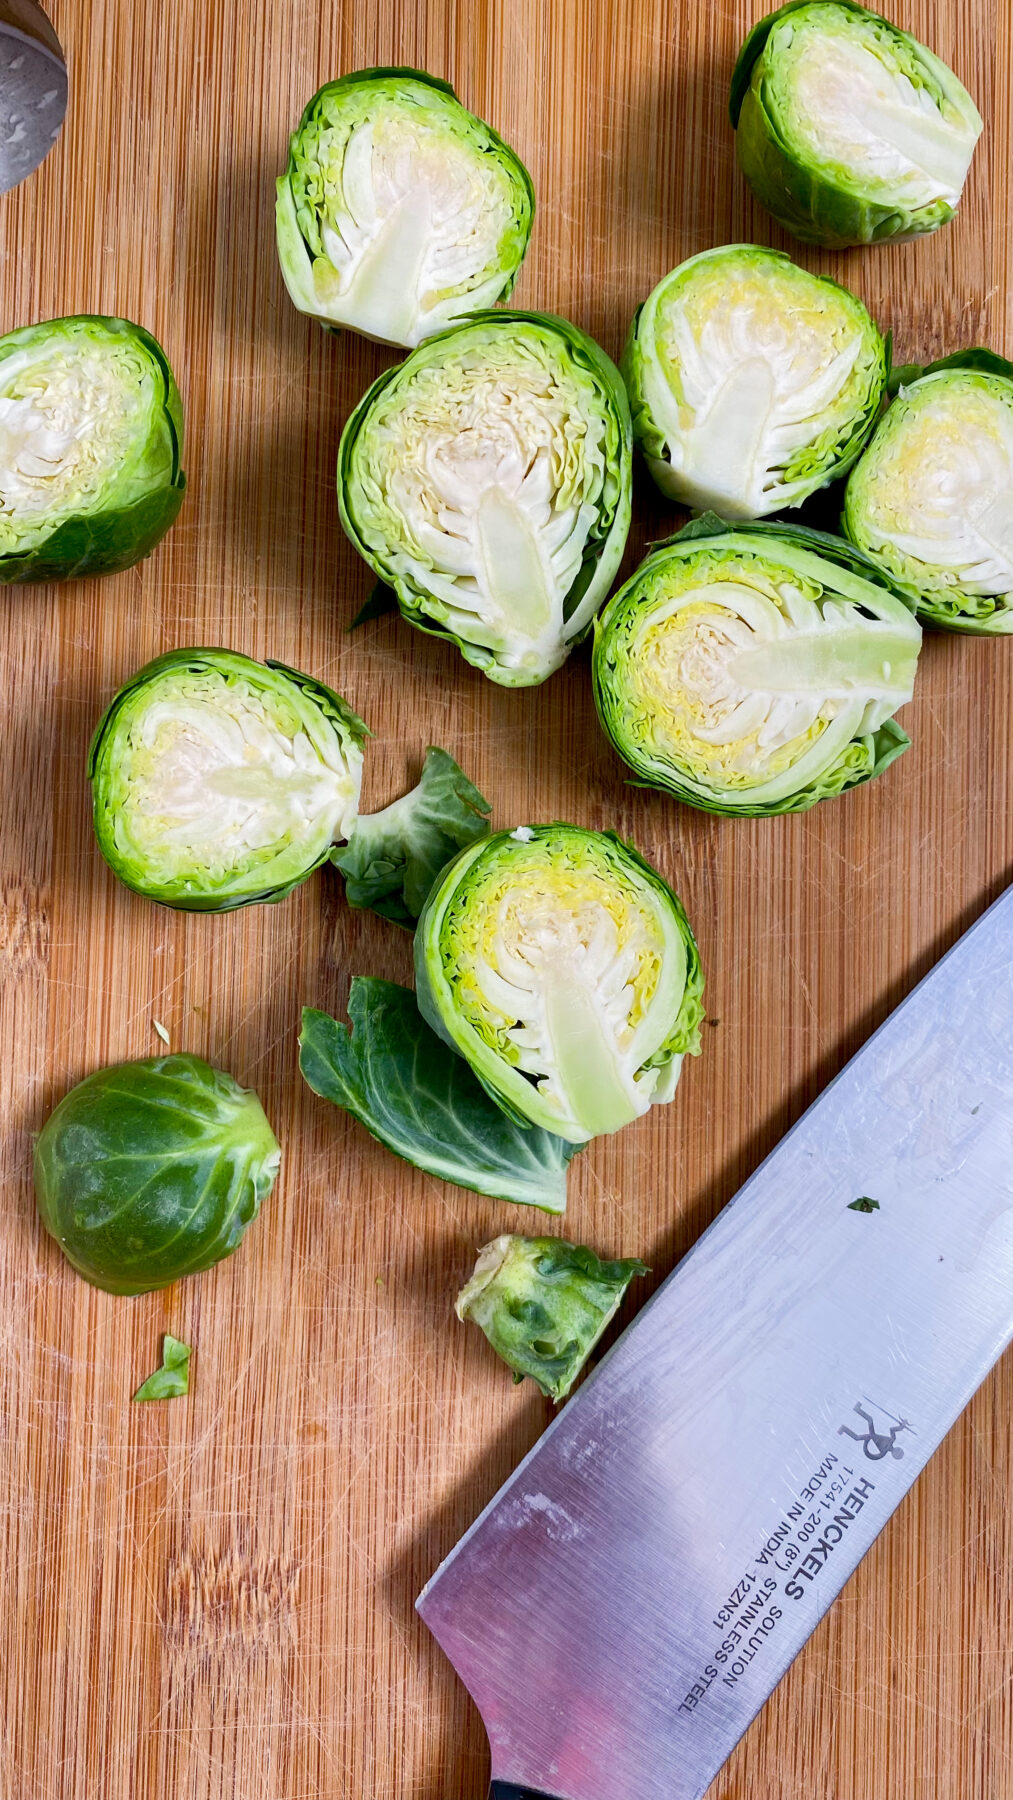 brussel sprouts being cut in half on a wooden cutting board